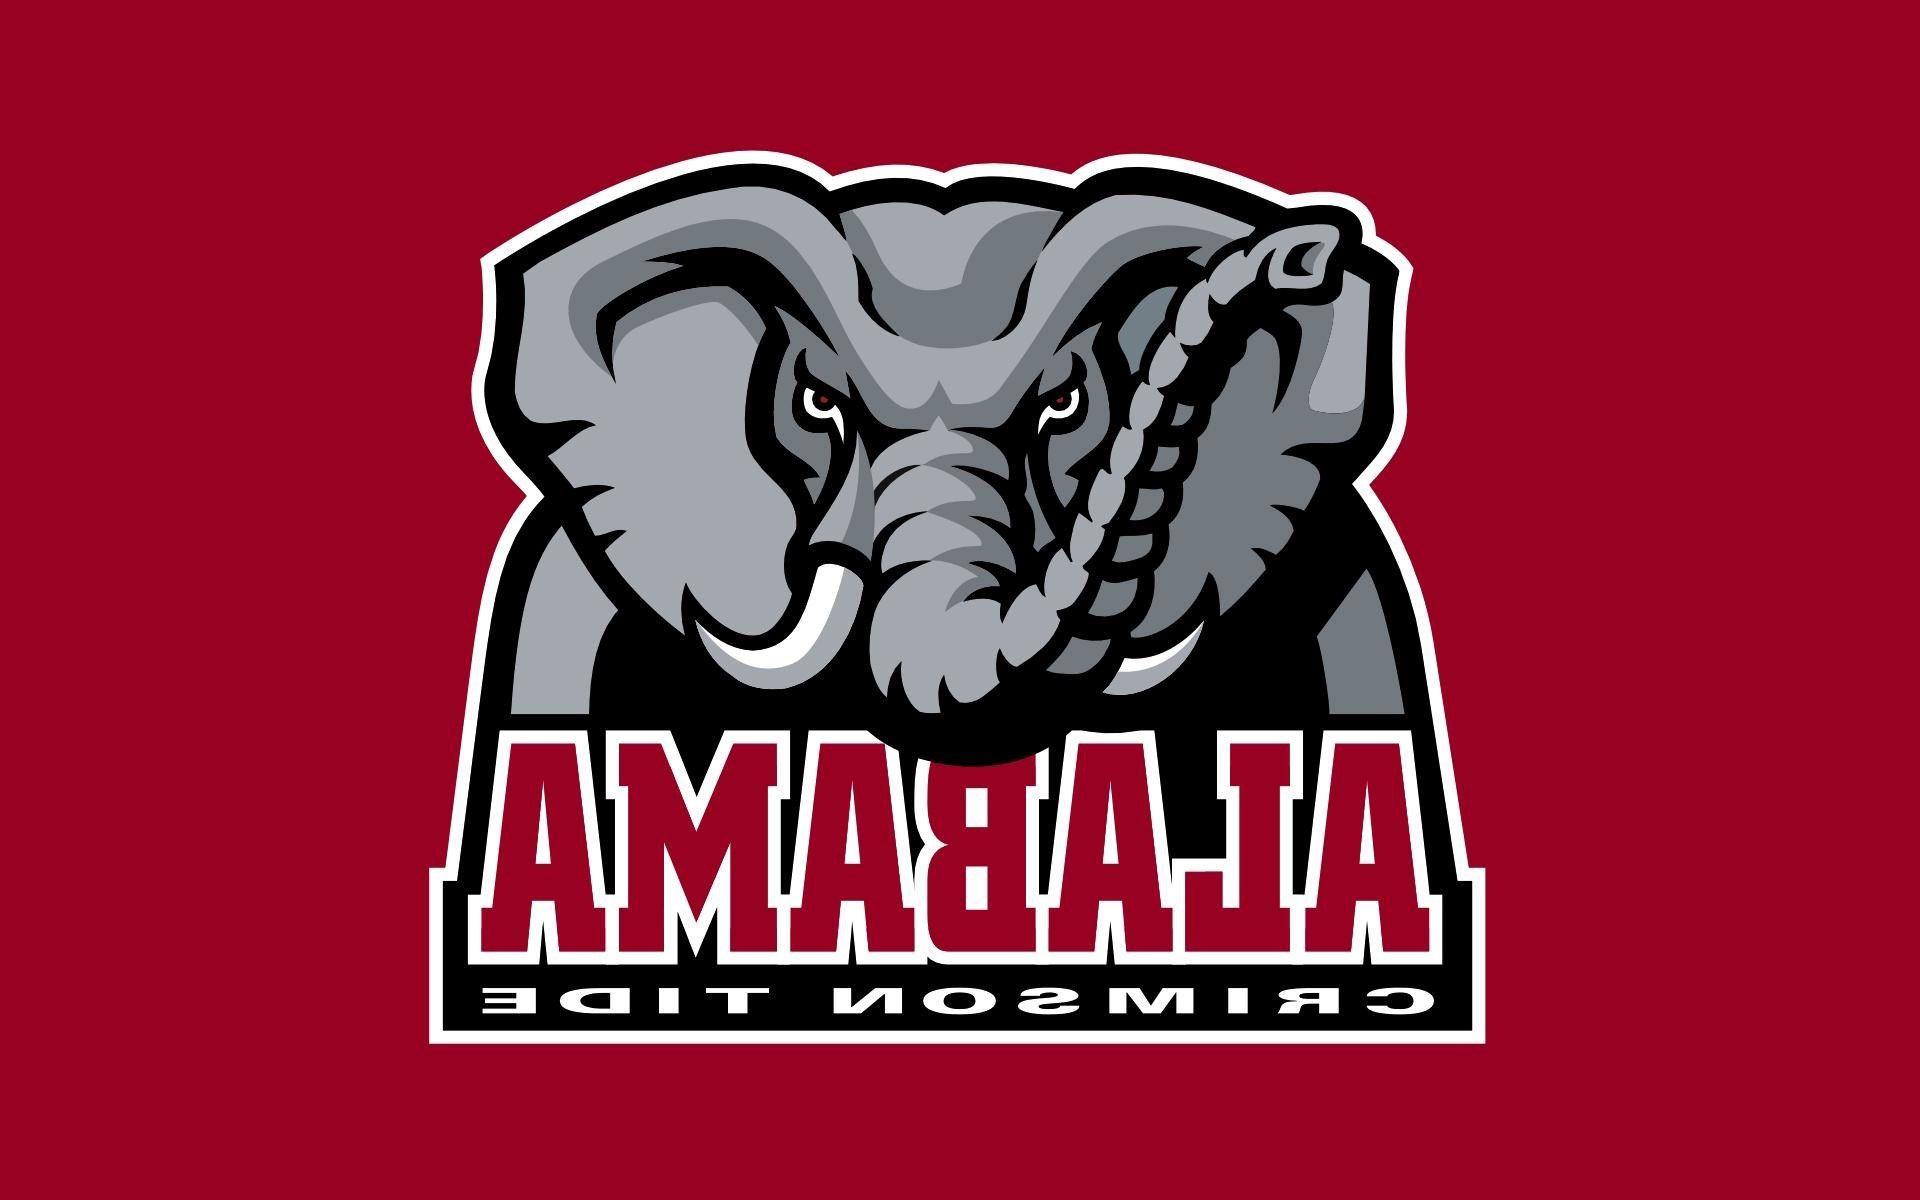 University Of Alabama Wallpaper For Iphone The Galleries